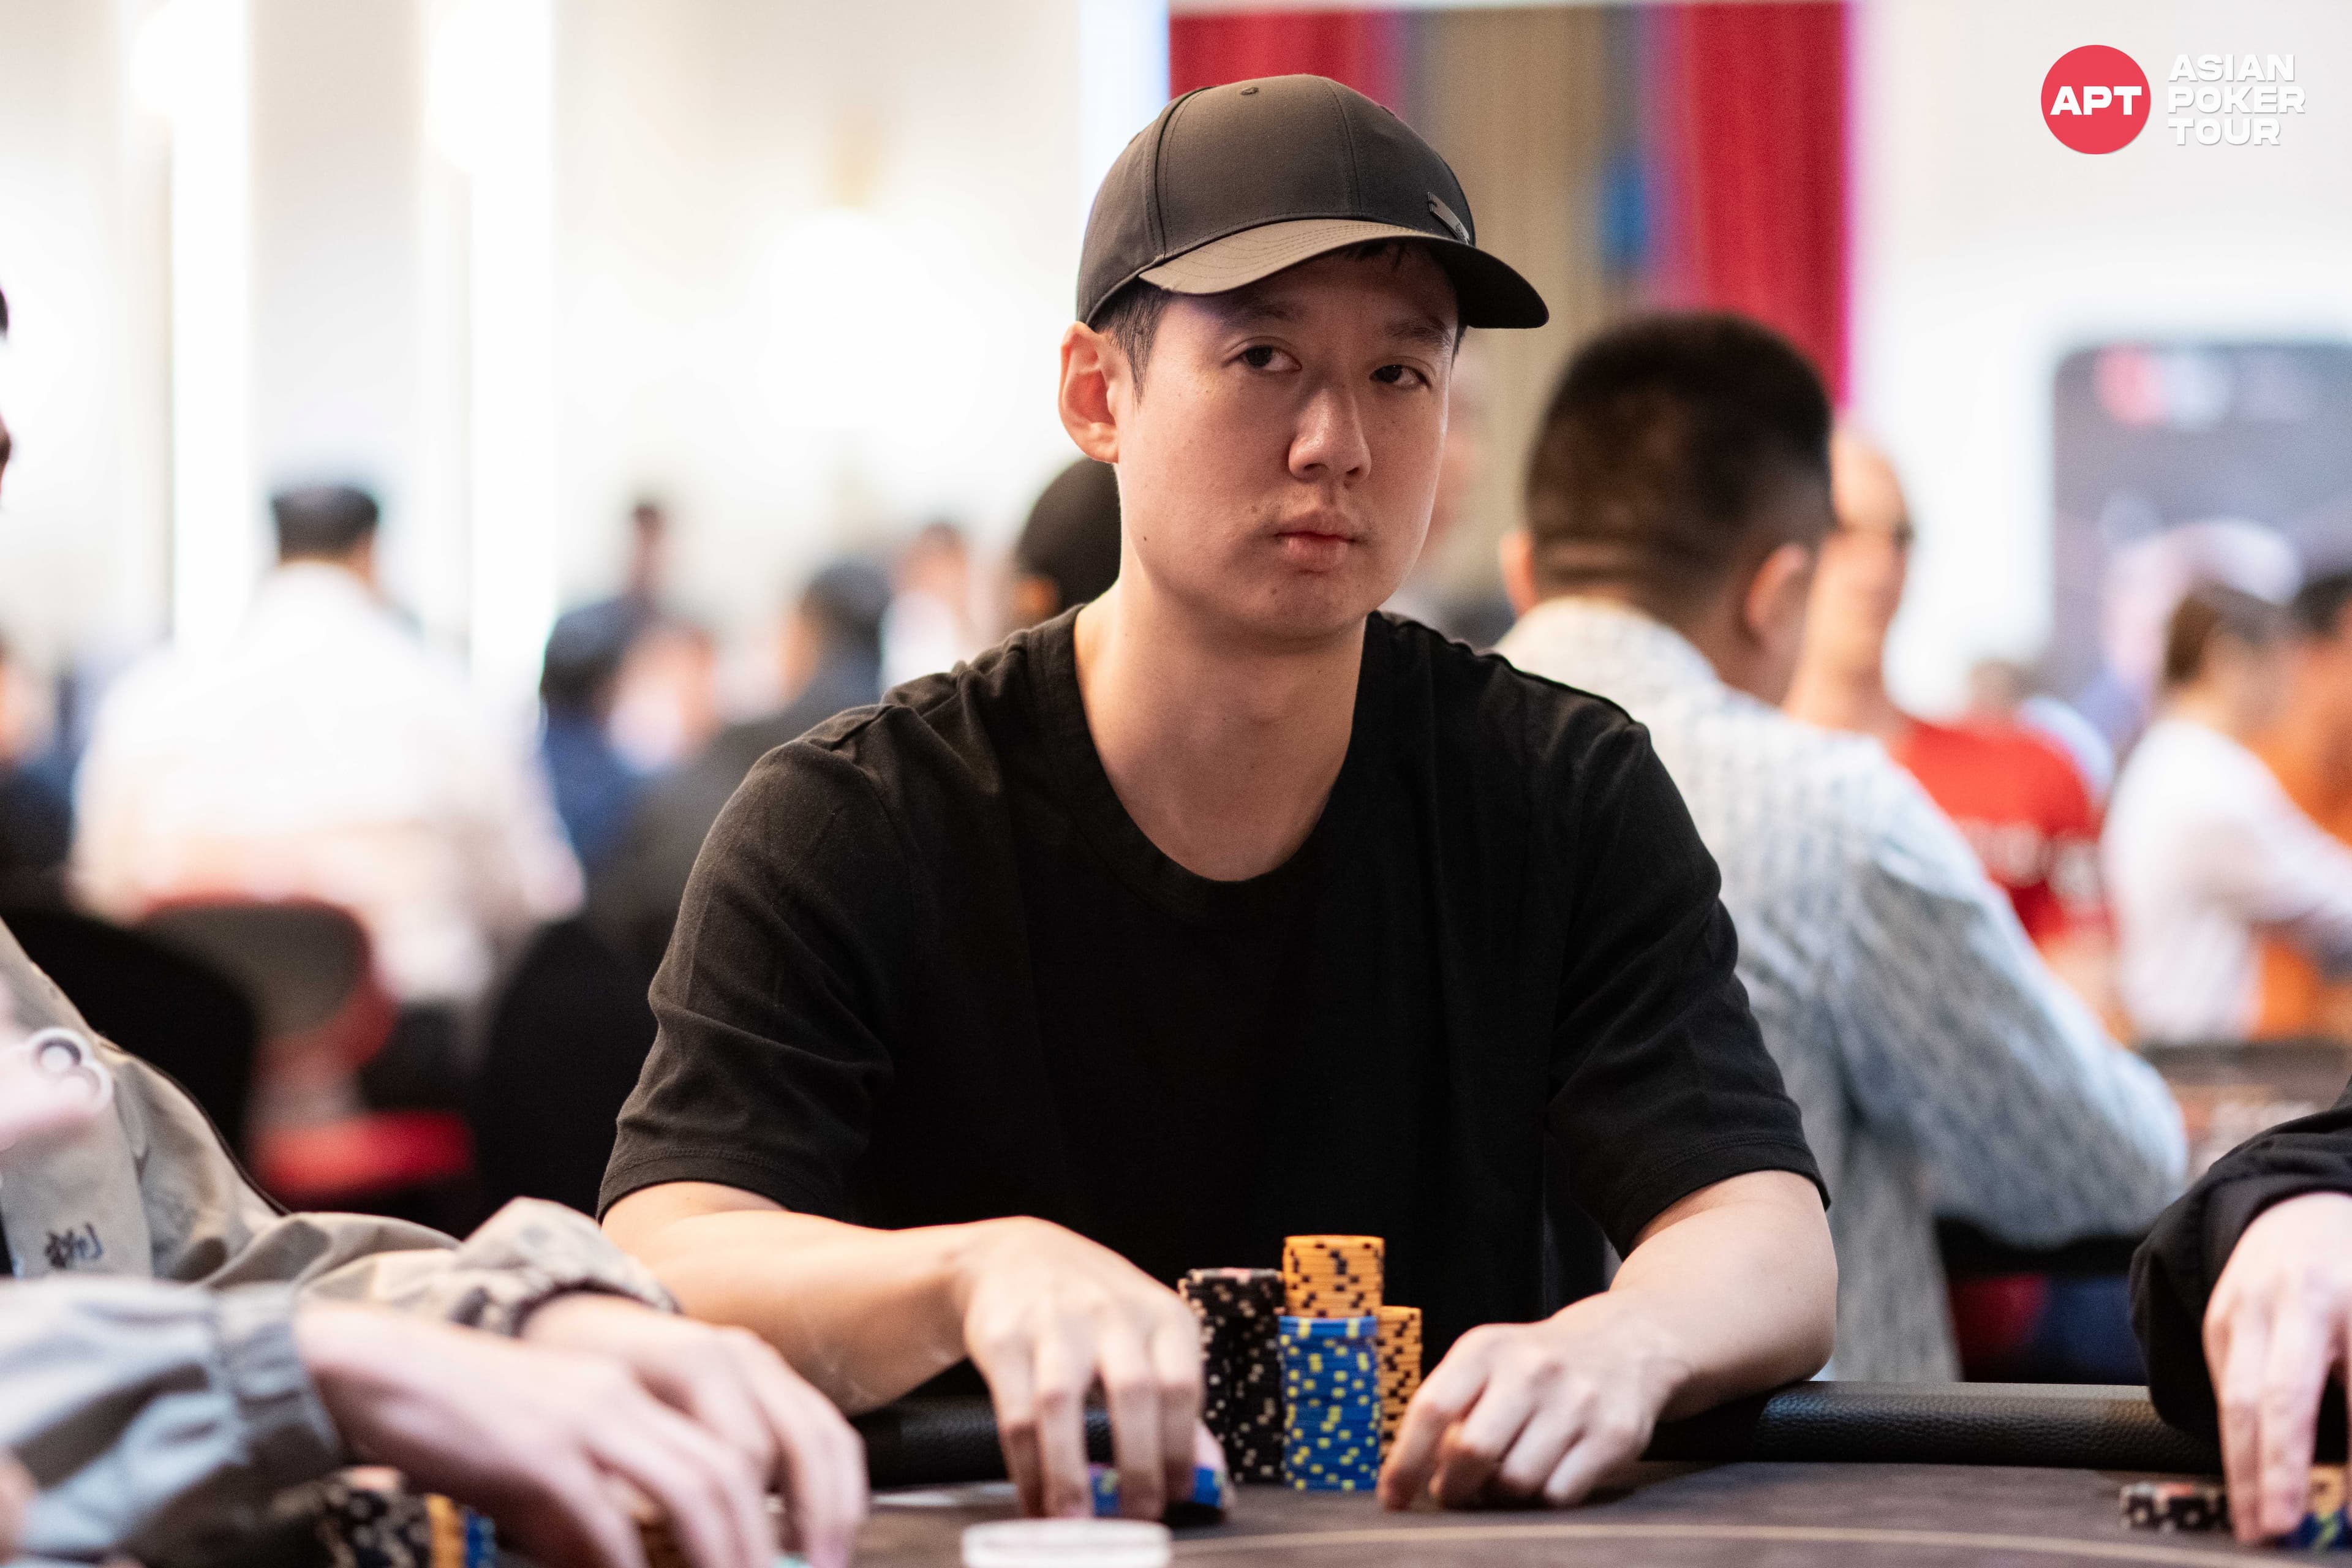 Australia's Aaron Lim Leads Day 2 of South Korea's Largest and Richest APT Main Event